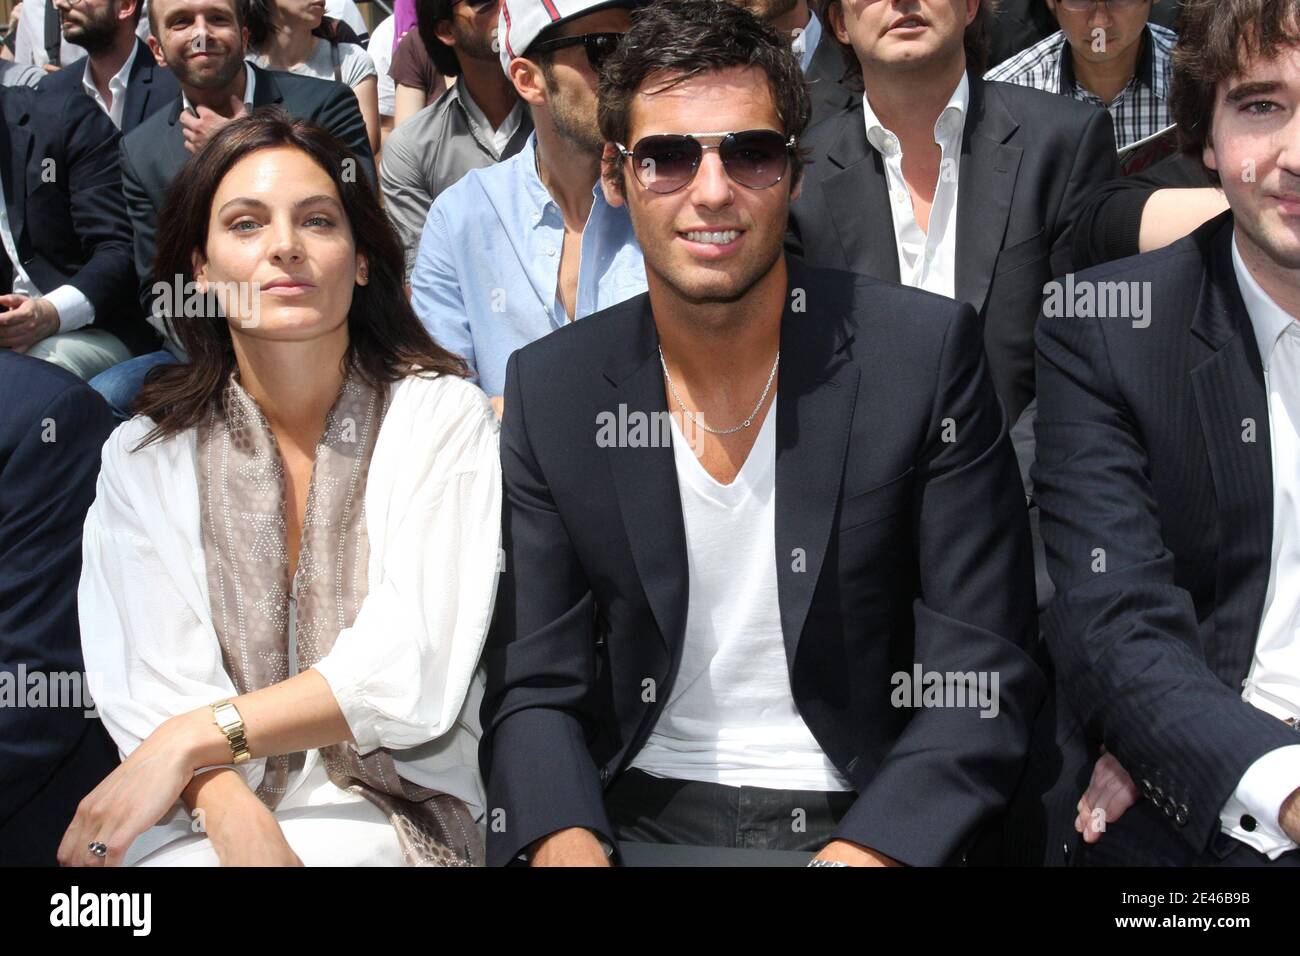 Bordeaux's soccer player Yoann Gourcuff with a friend during Louis Vuitton  the men's 2009-2010 spring-summer ready to wear (French PAP) collection  show held at 'Le 104 Centquatre' in Paris, France, on Juin